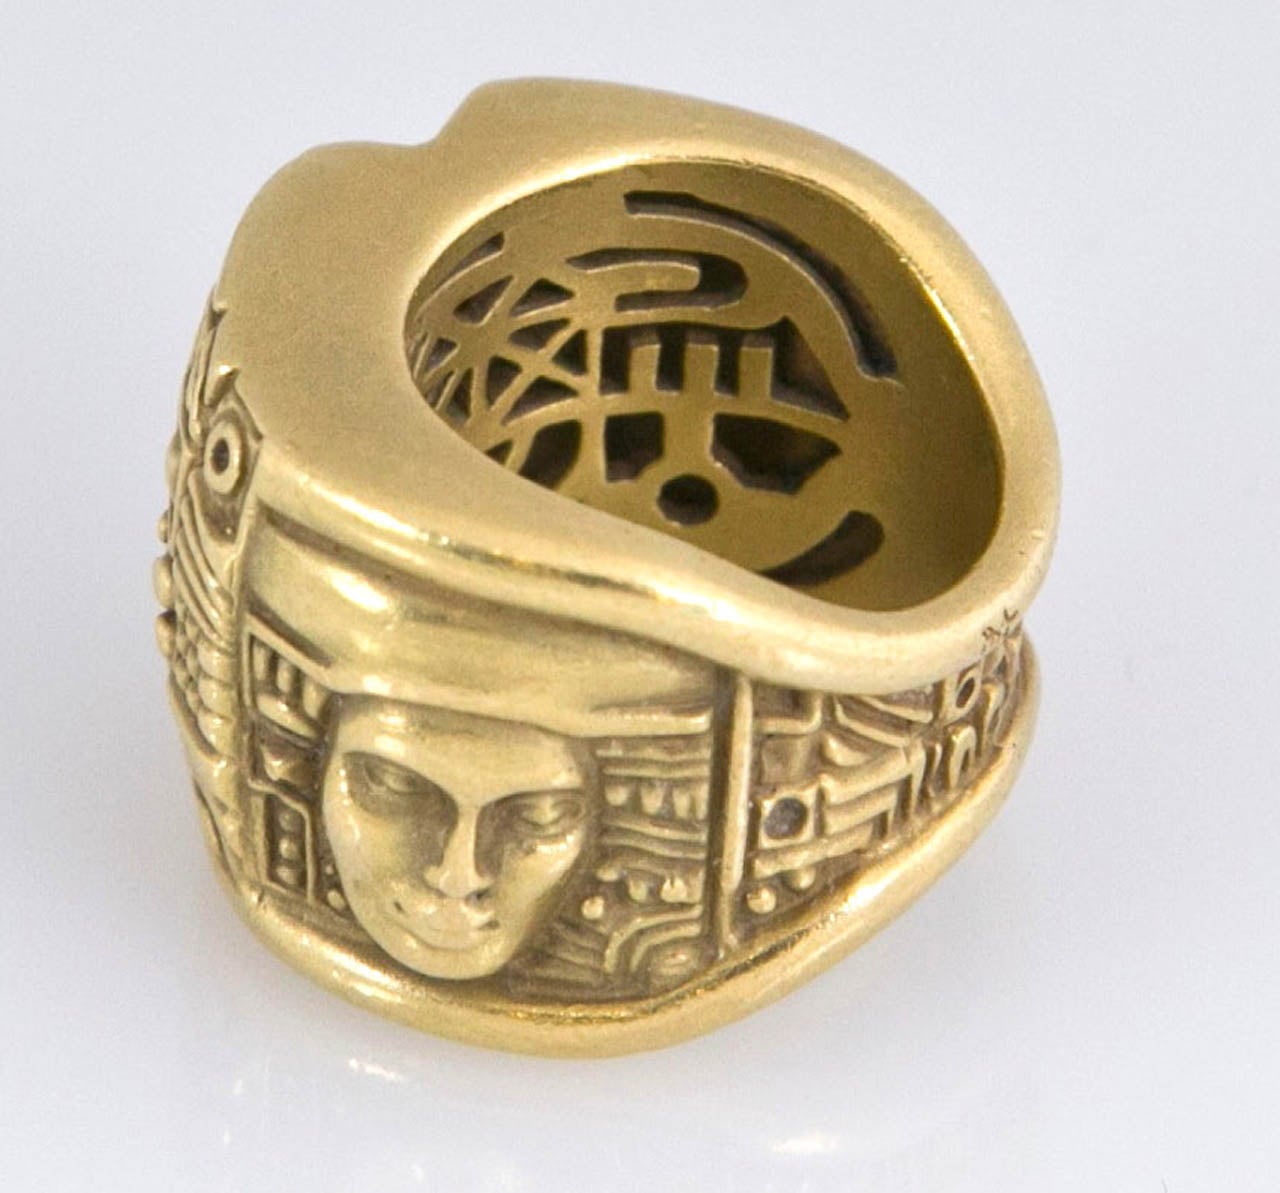 This ring is part of famed designer Barry Kieselstein Cord series of
Women of the World design- It is made of 18k gold
It has two profiles and one mask like visage
Ring is size 7- Narked B. Kieselstein Cord 1993 -750